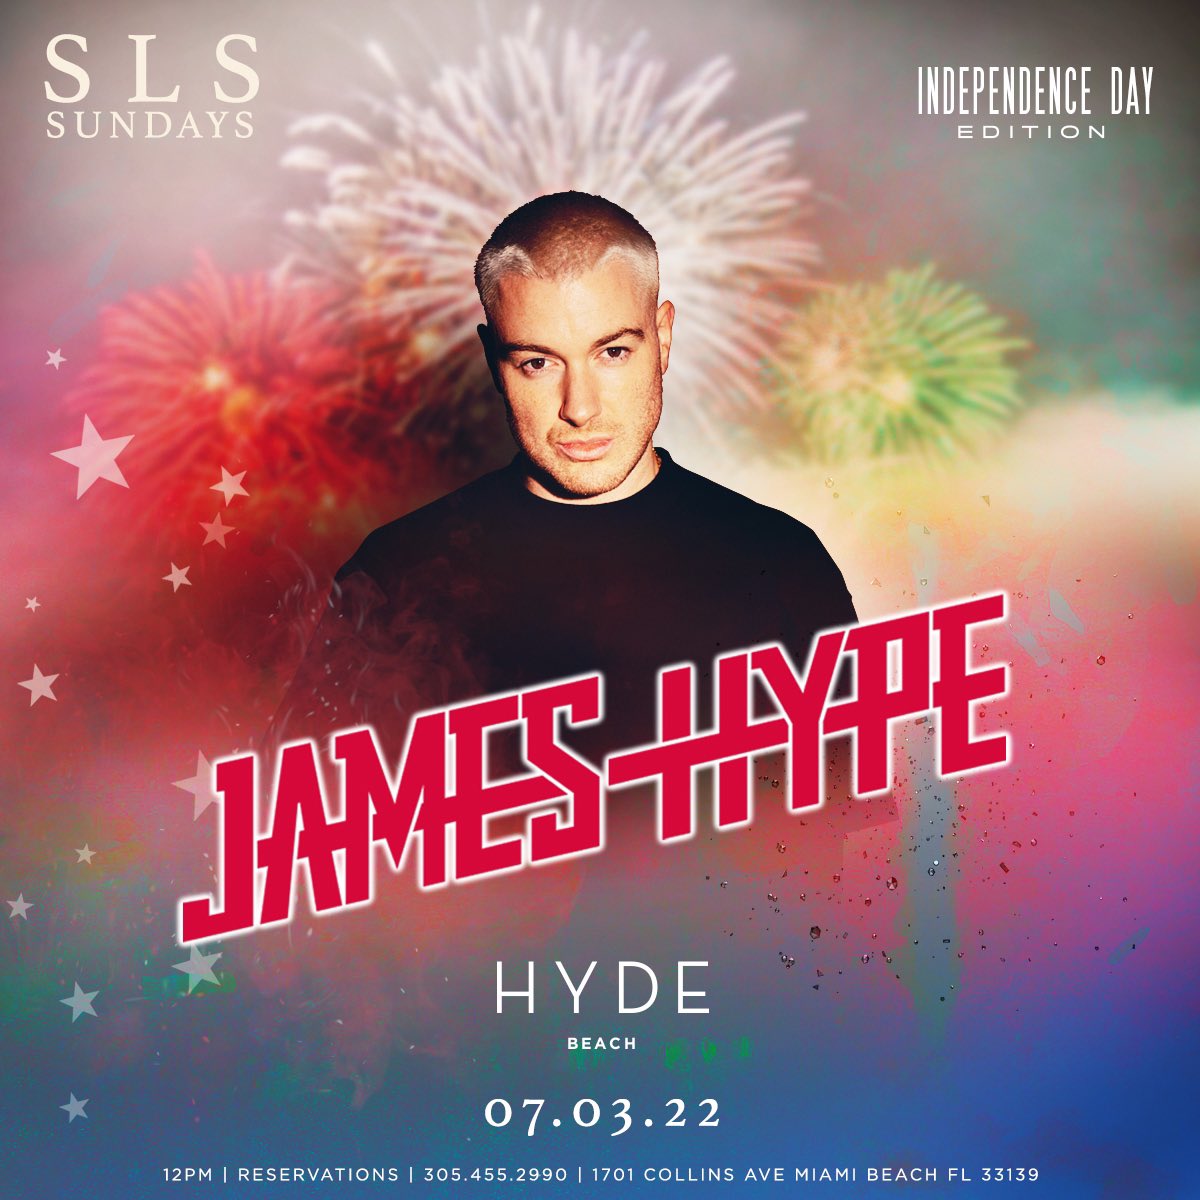 Let’s get hype this Independence Weekend! 💥🍾 @JamesHYPE takes over SLSS Sunday’s July 3rd - For tickets visit tixr.com/e/45334